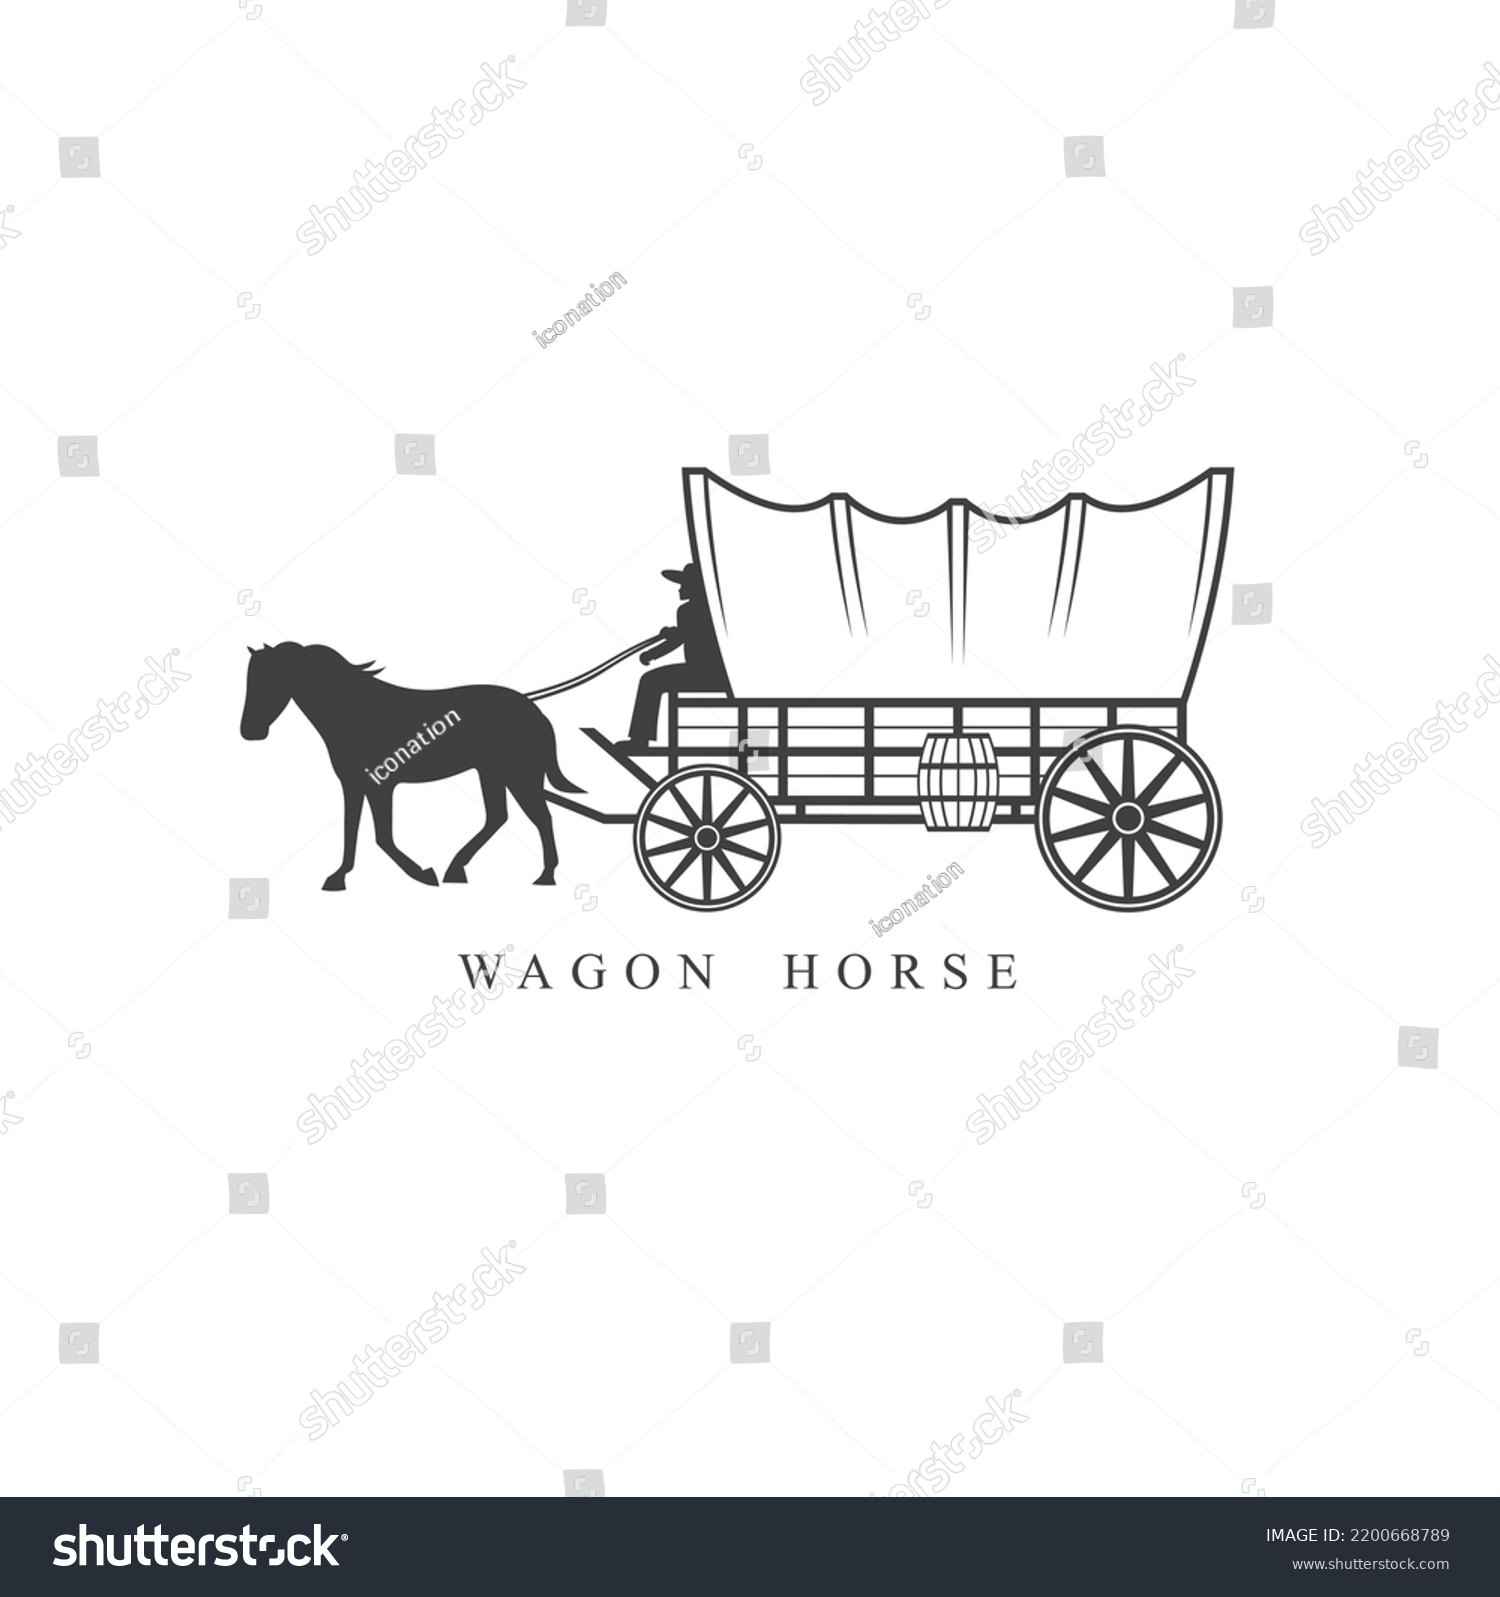 SVG of illustration of covered wagon horse cart, wagon western. svg